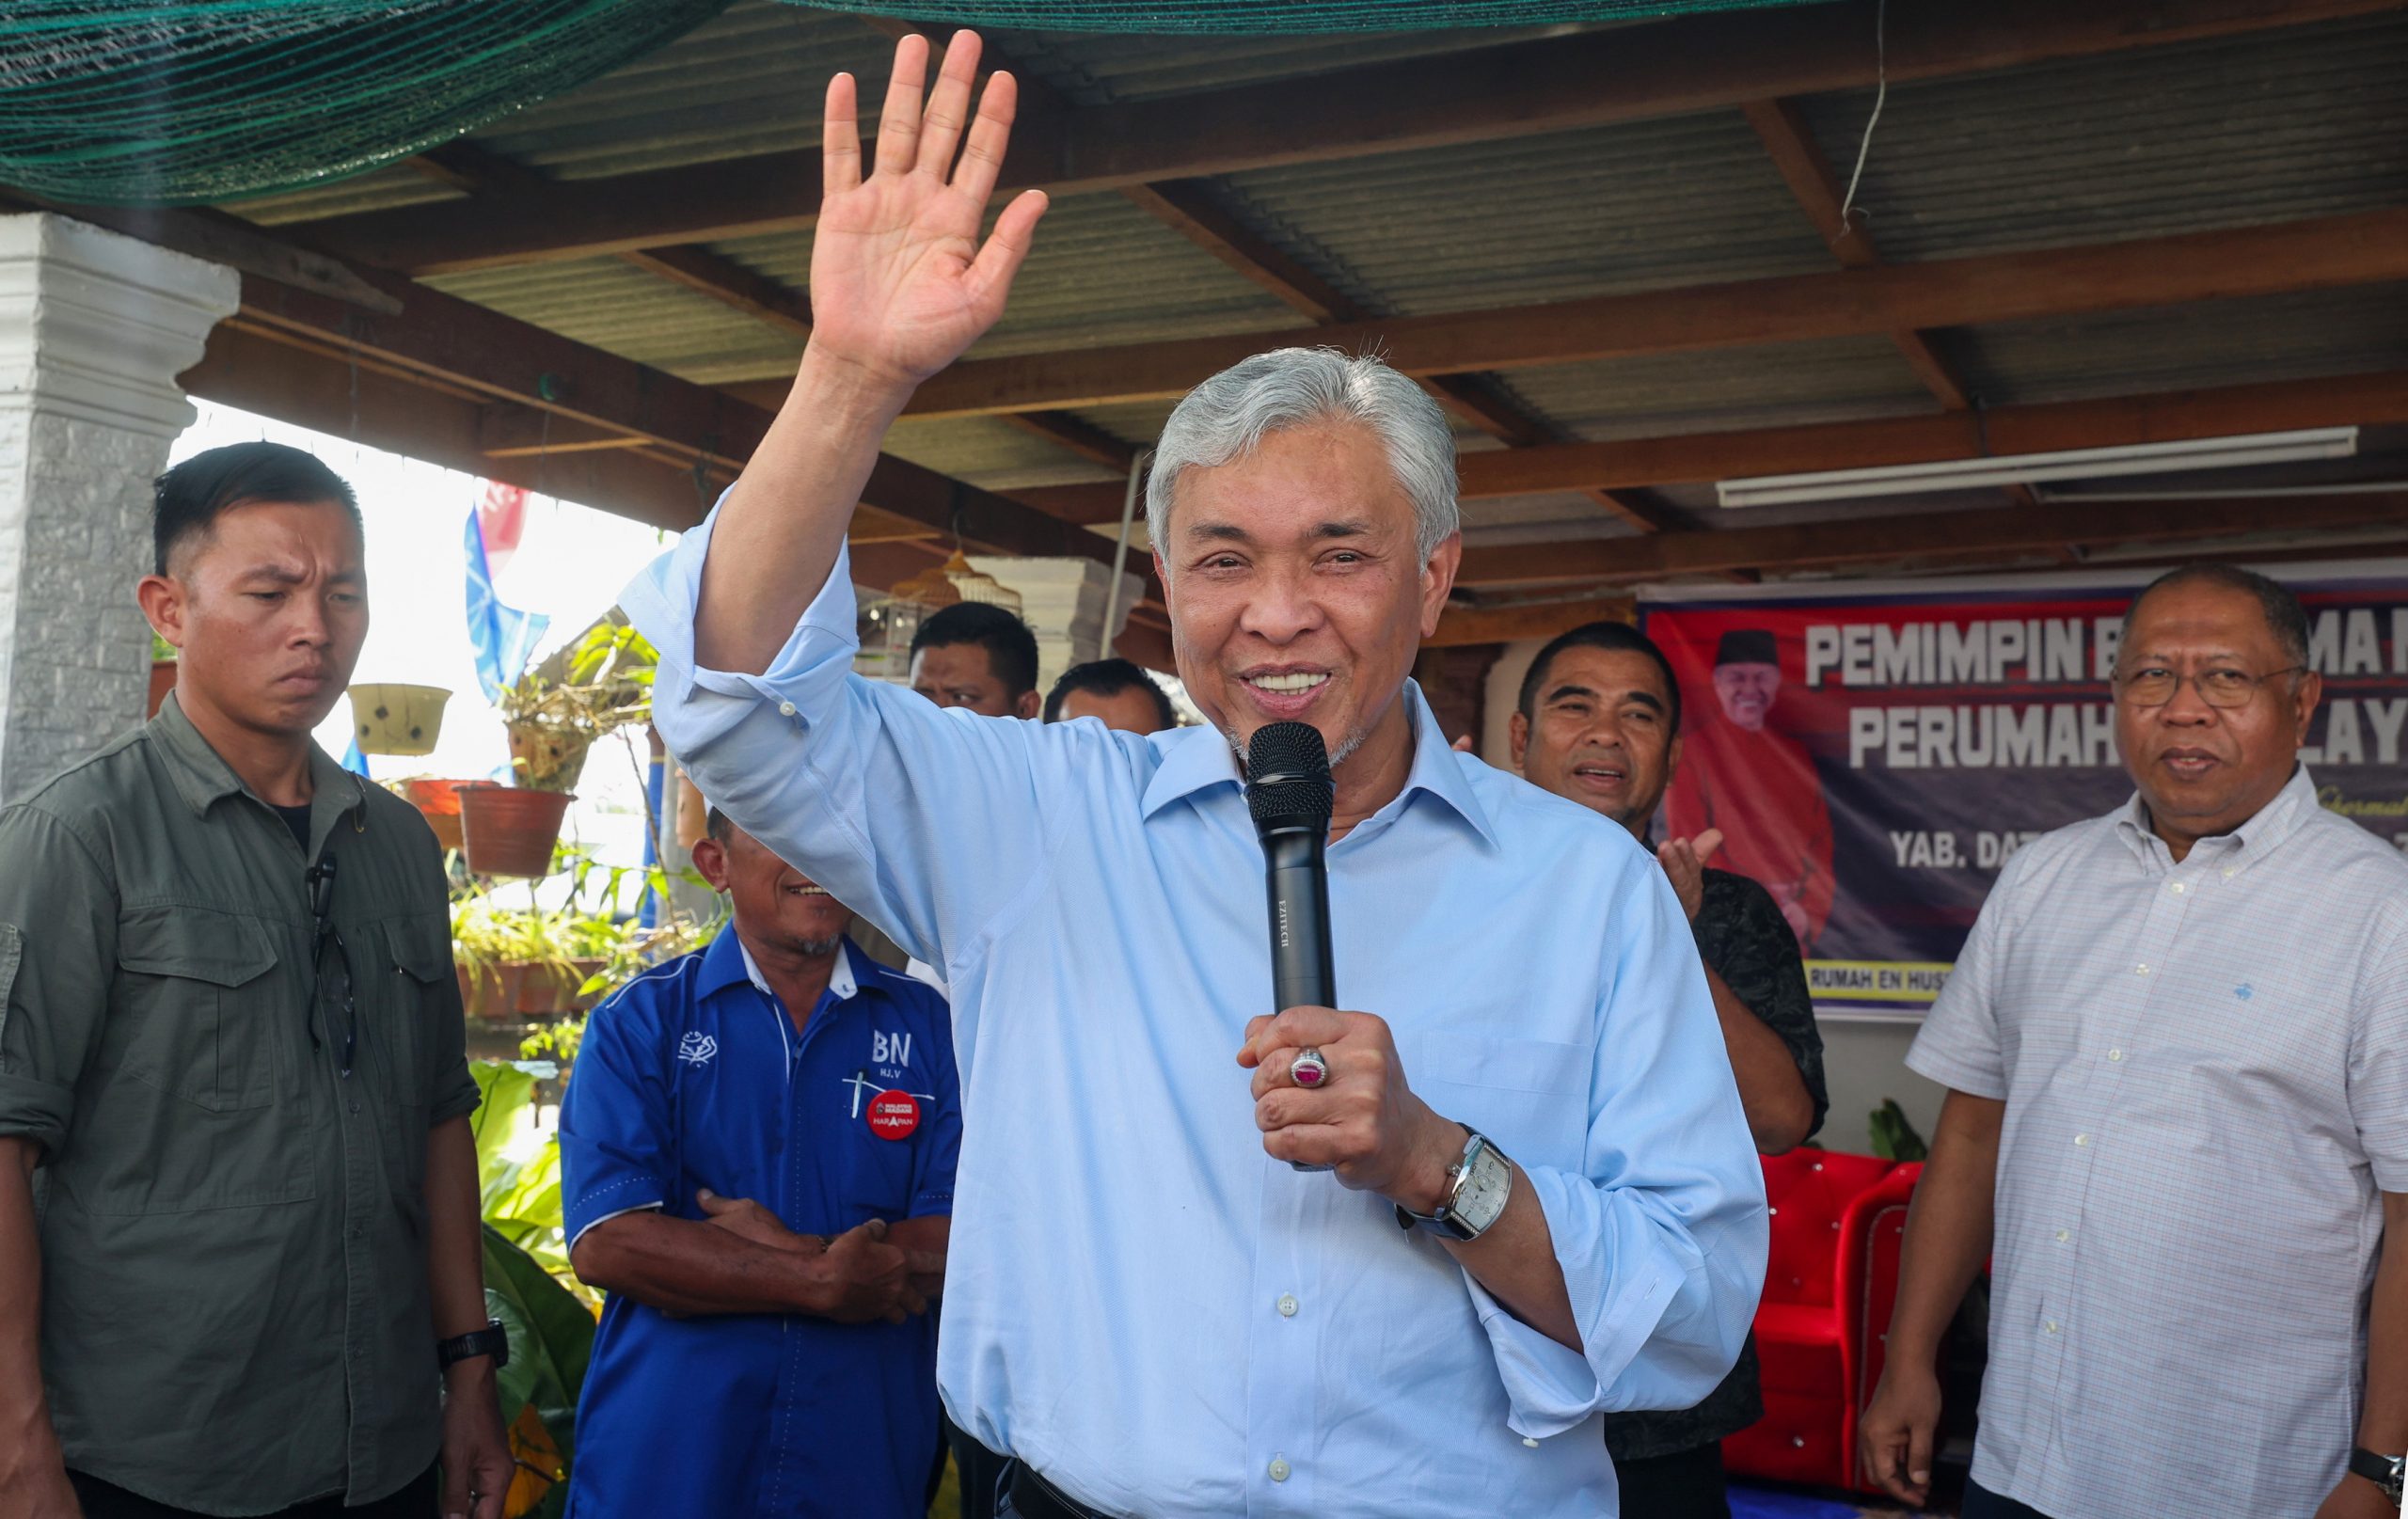 Zahid's lawyers push AGC to hasten decision on representations